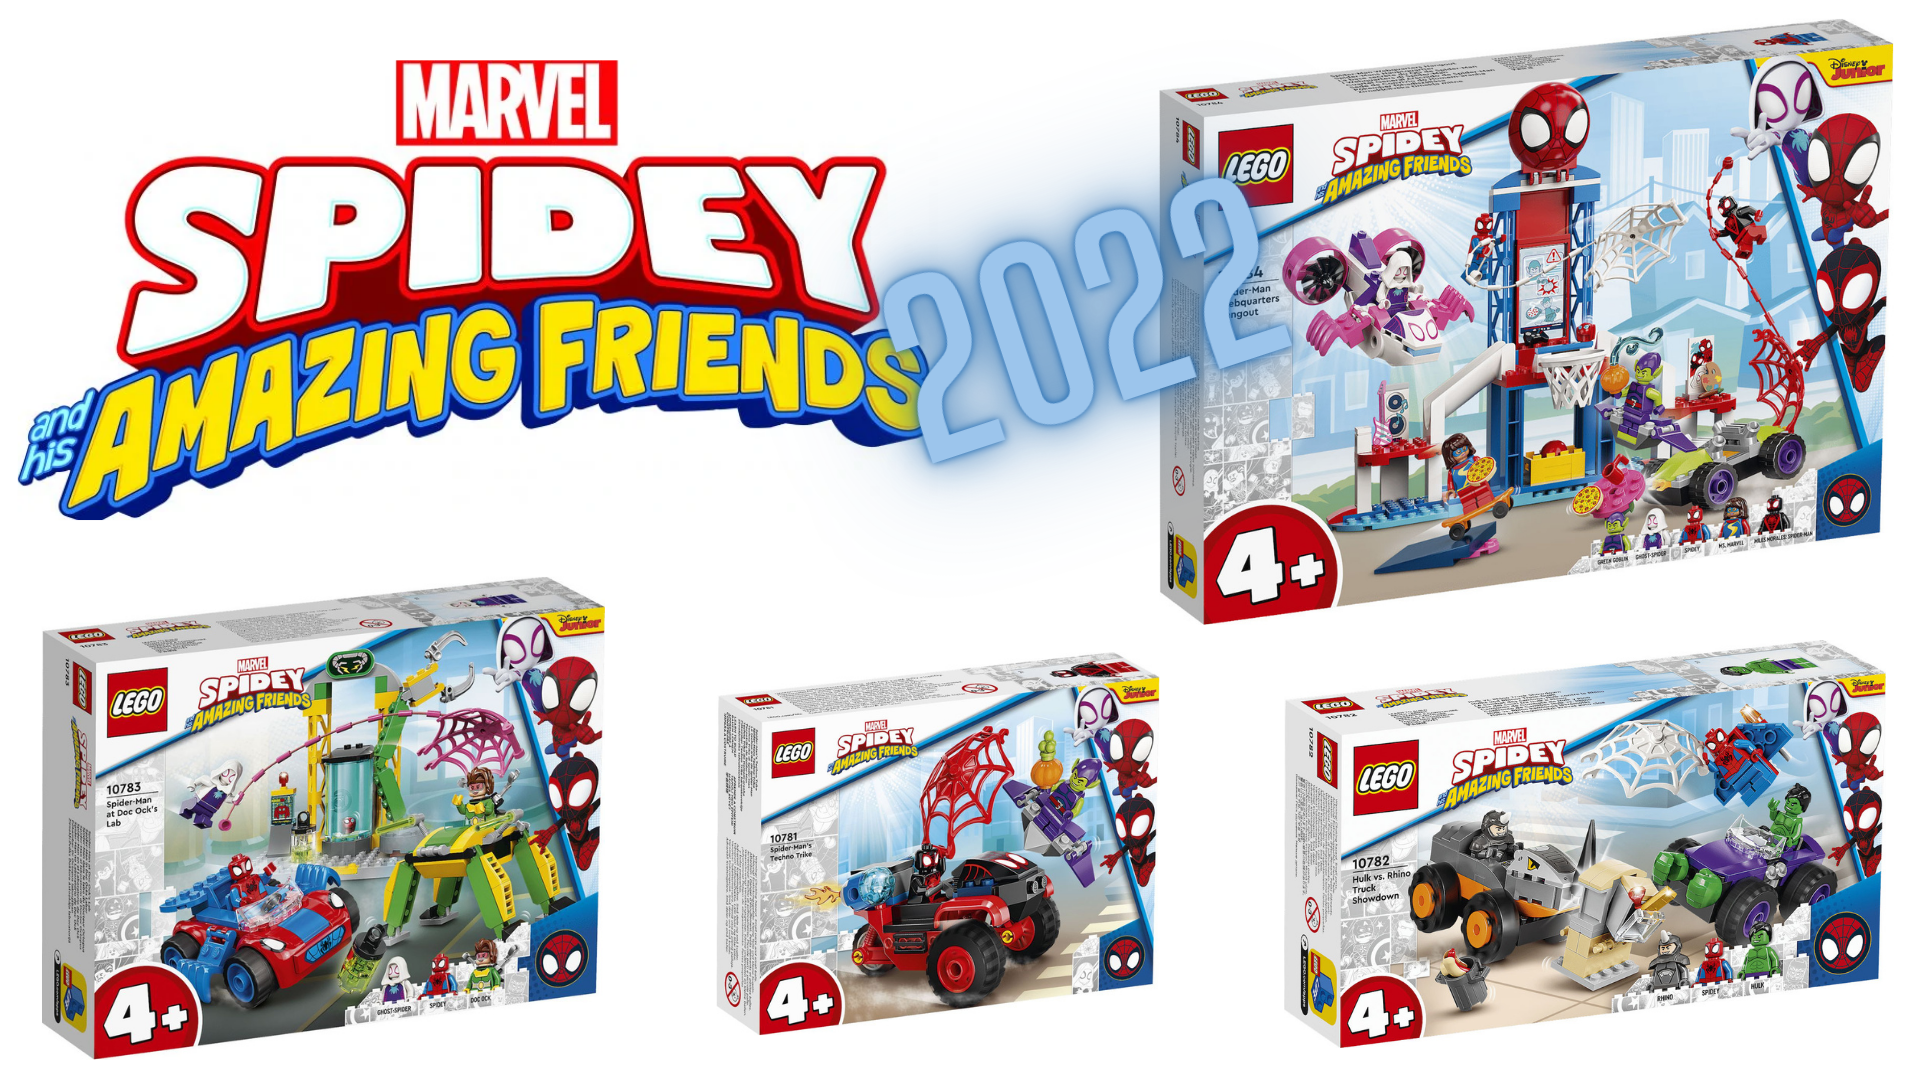 First look at LEGO Spidey and his Amazing Friends sets(4+), coming